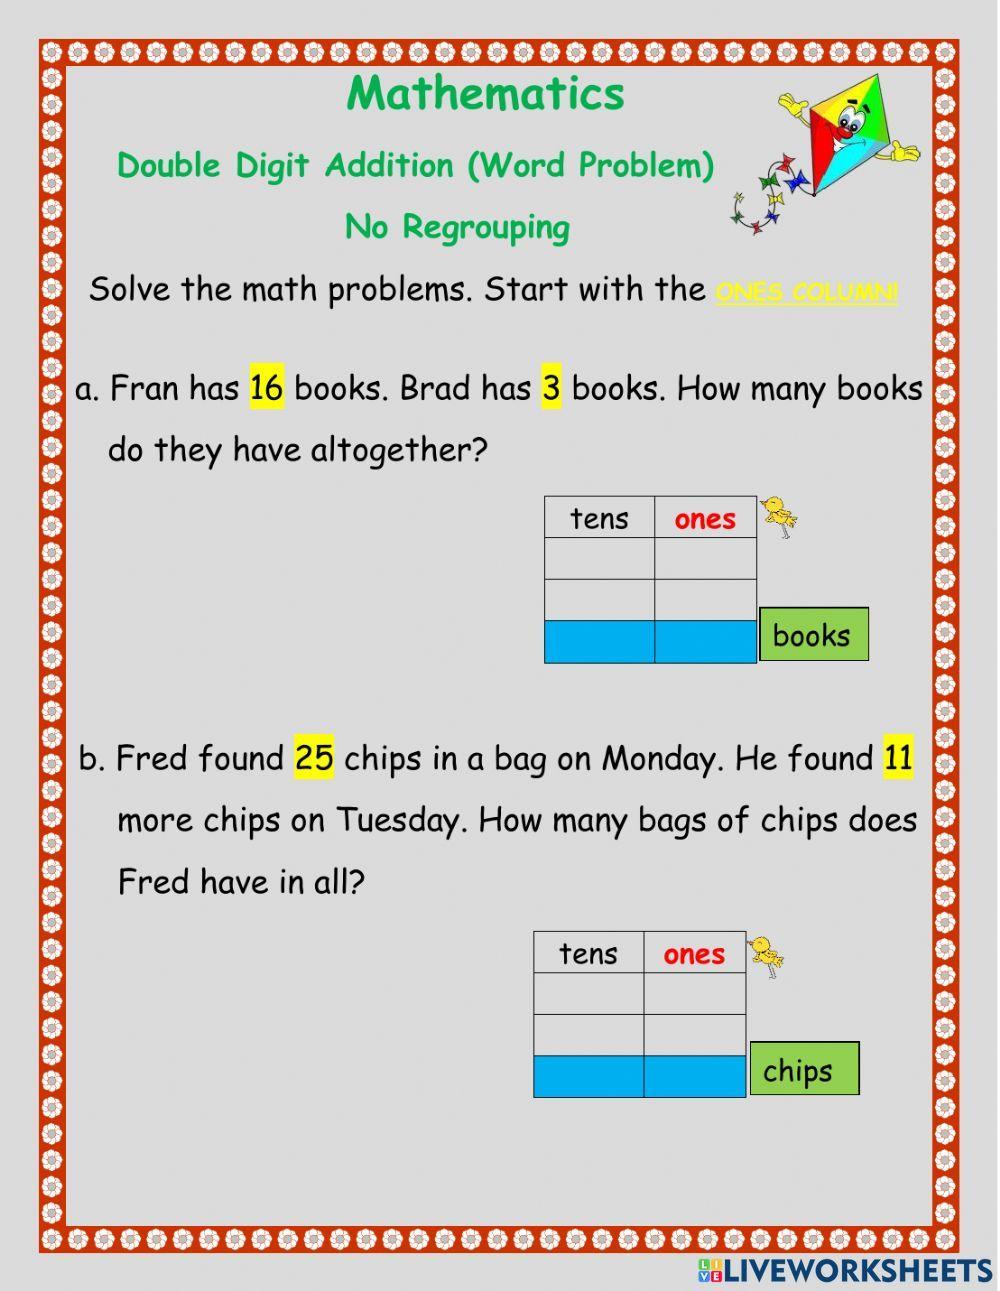 Double digit addition -word problem -2